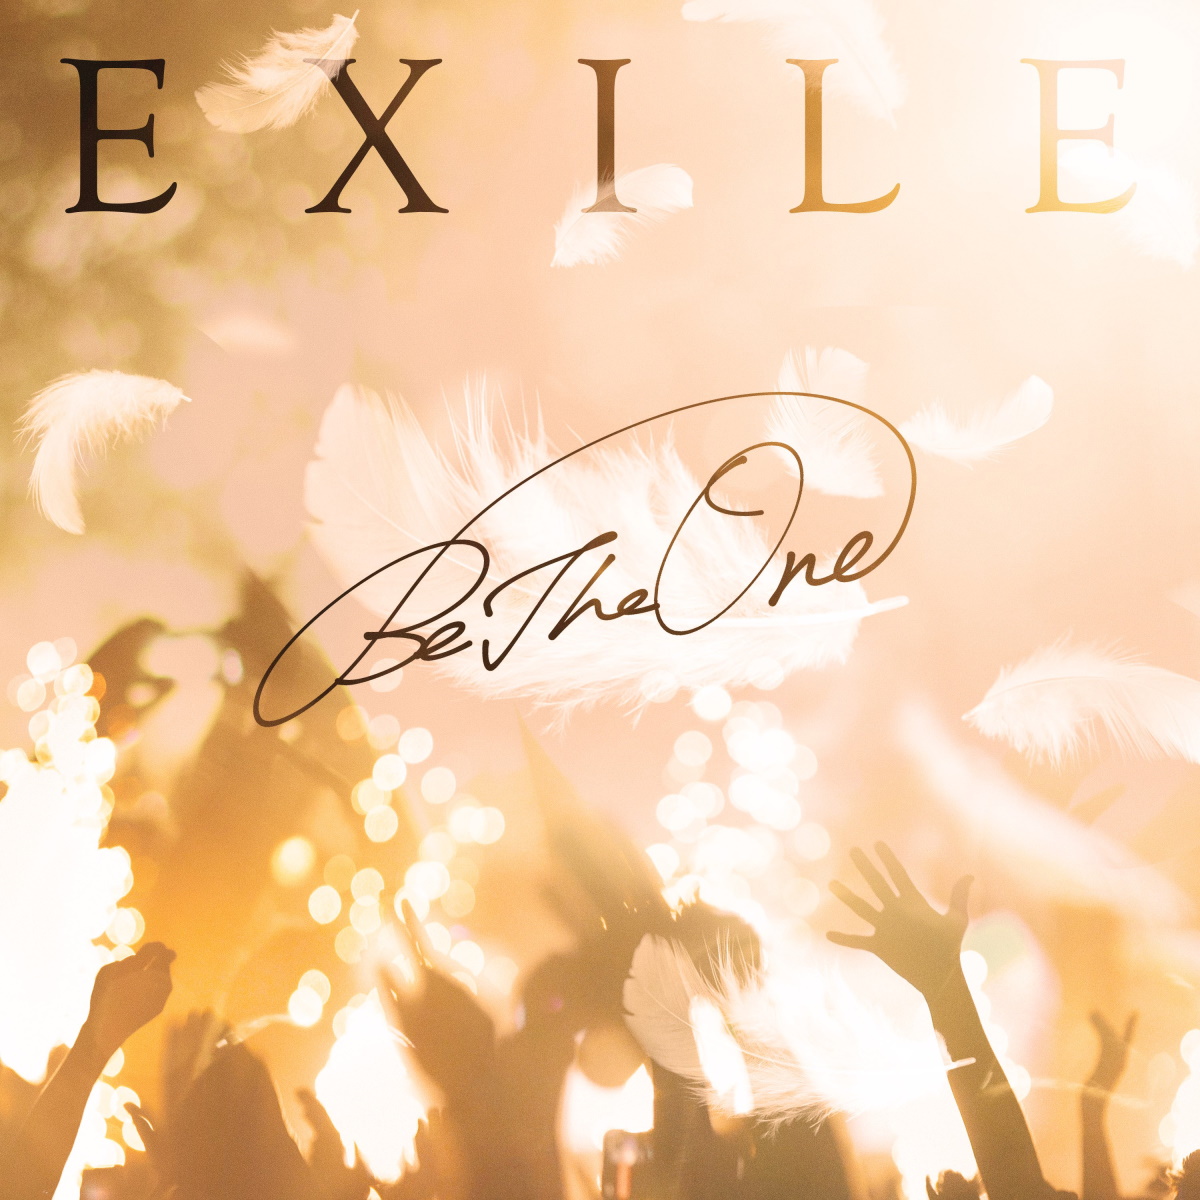 『EXILE - BE THE ONE』収録の『BE THE ONE』ジャケット